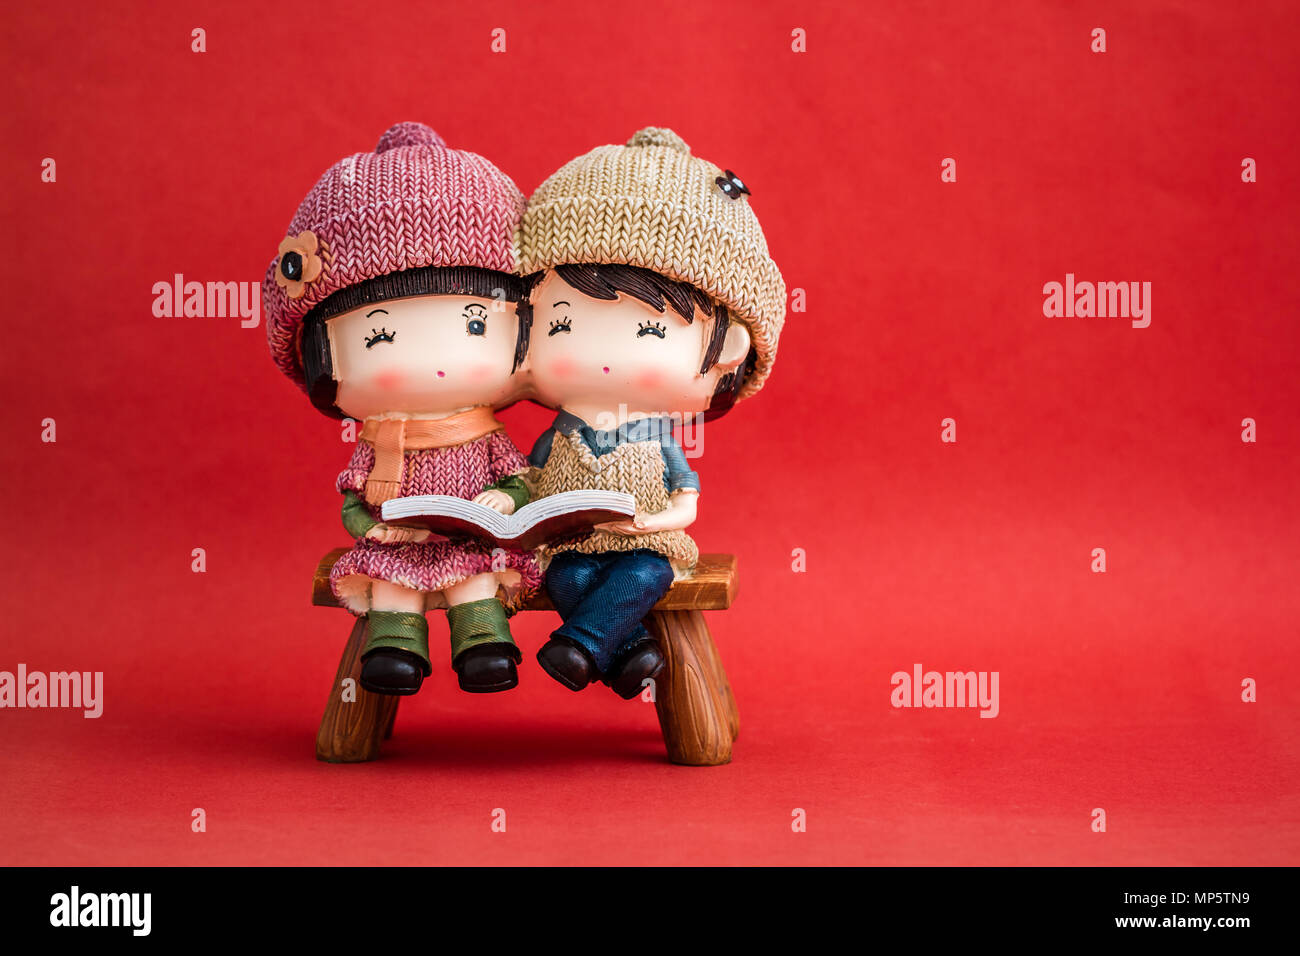 Cute couple figurines on red background Stock Photo - Alamy